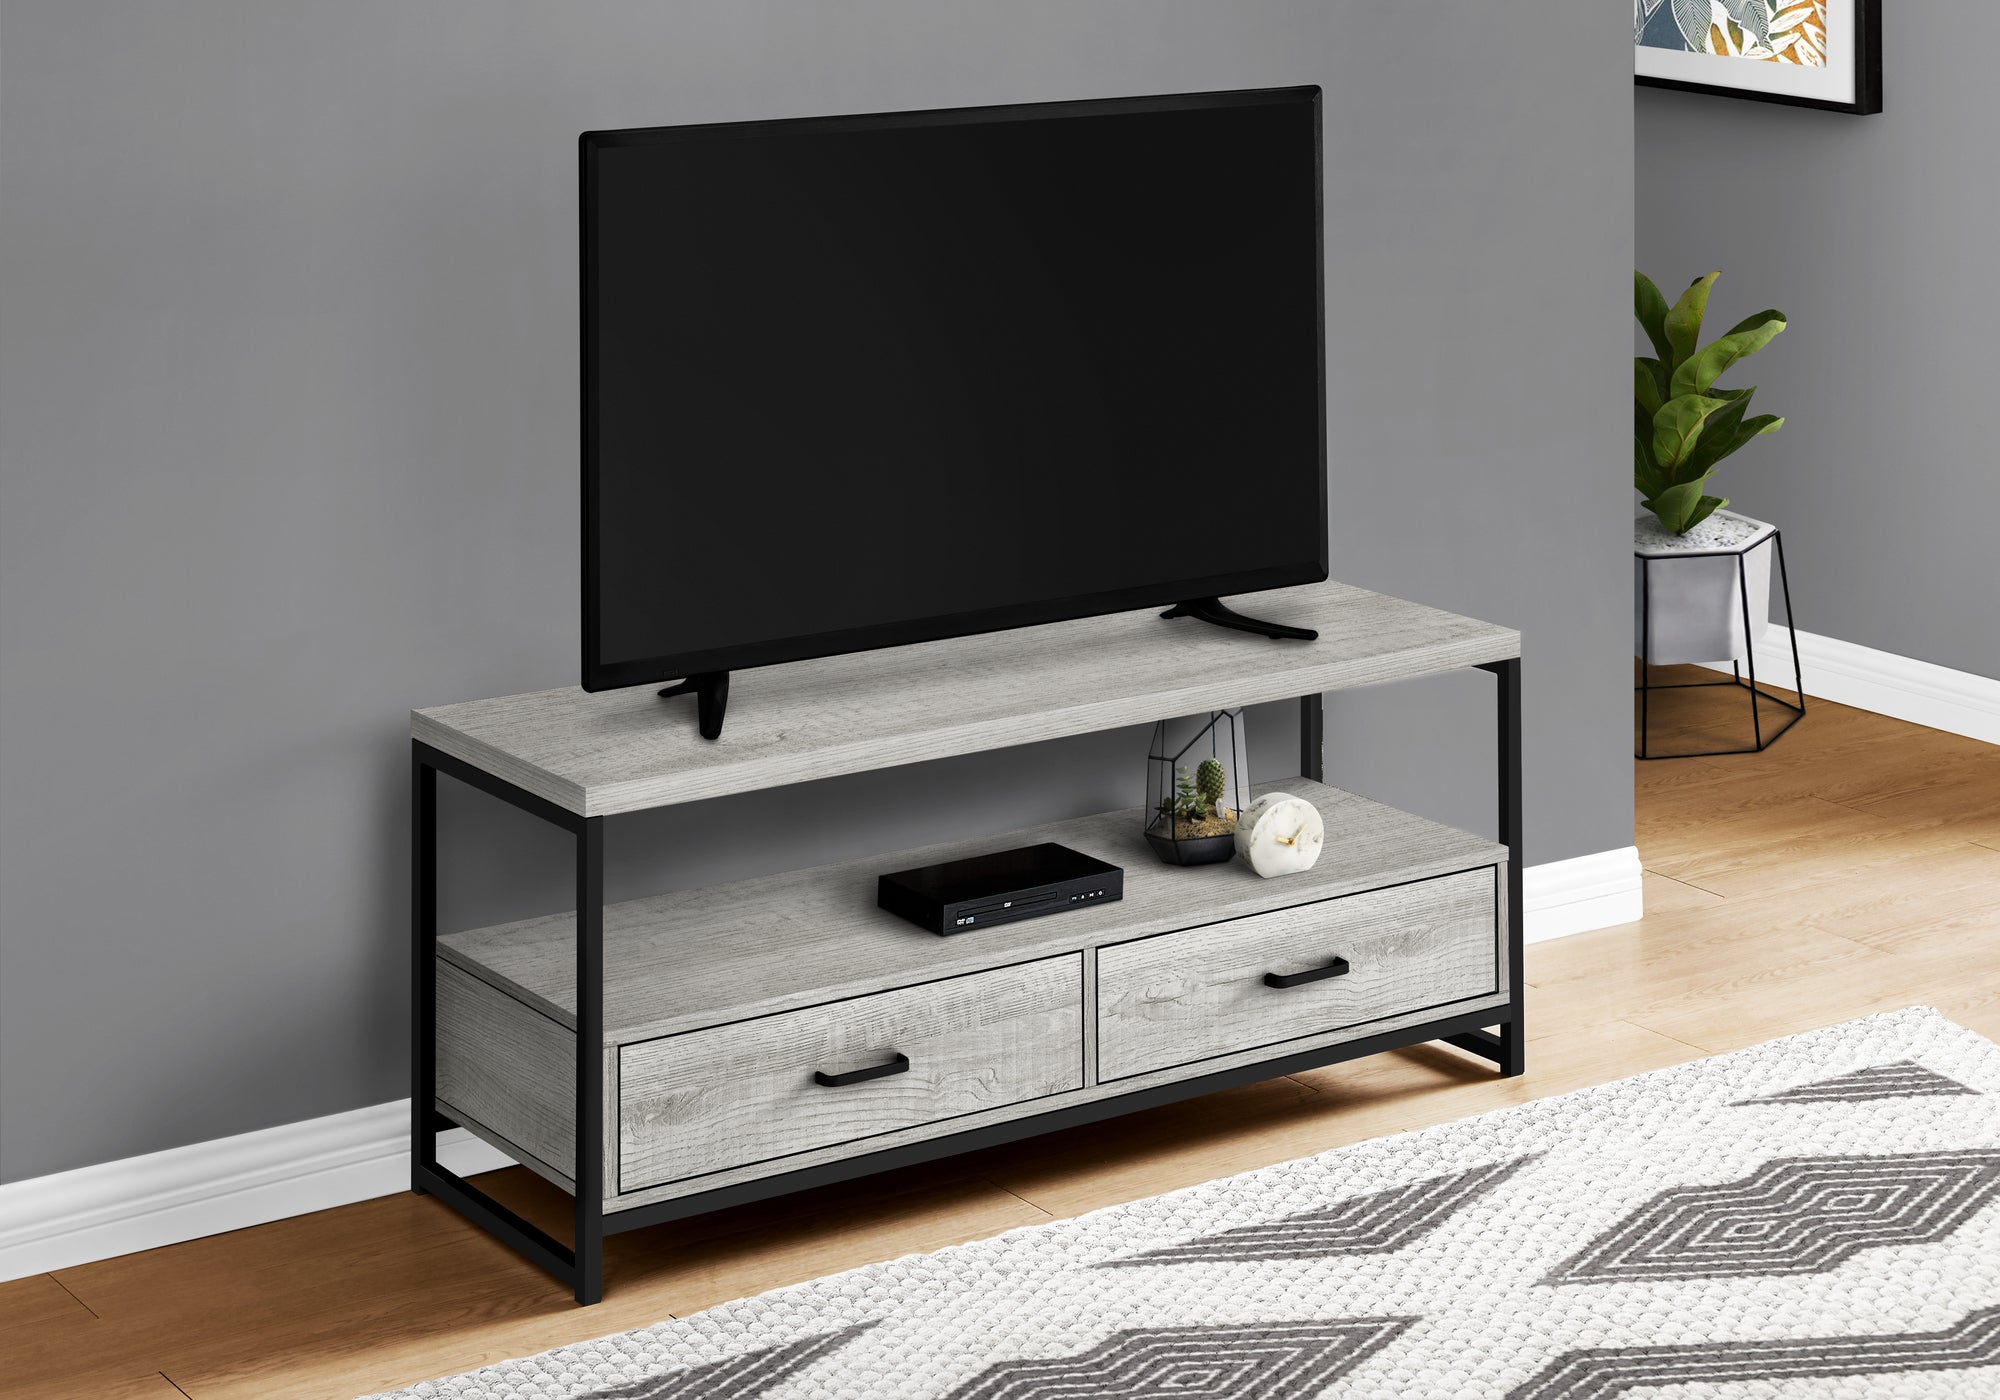 I 2871 TV STAND - 48"L / GREY / BLACK METAL BY MONARCH SPECIALTIES INC